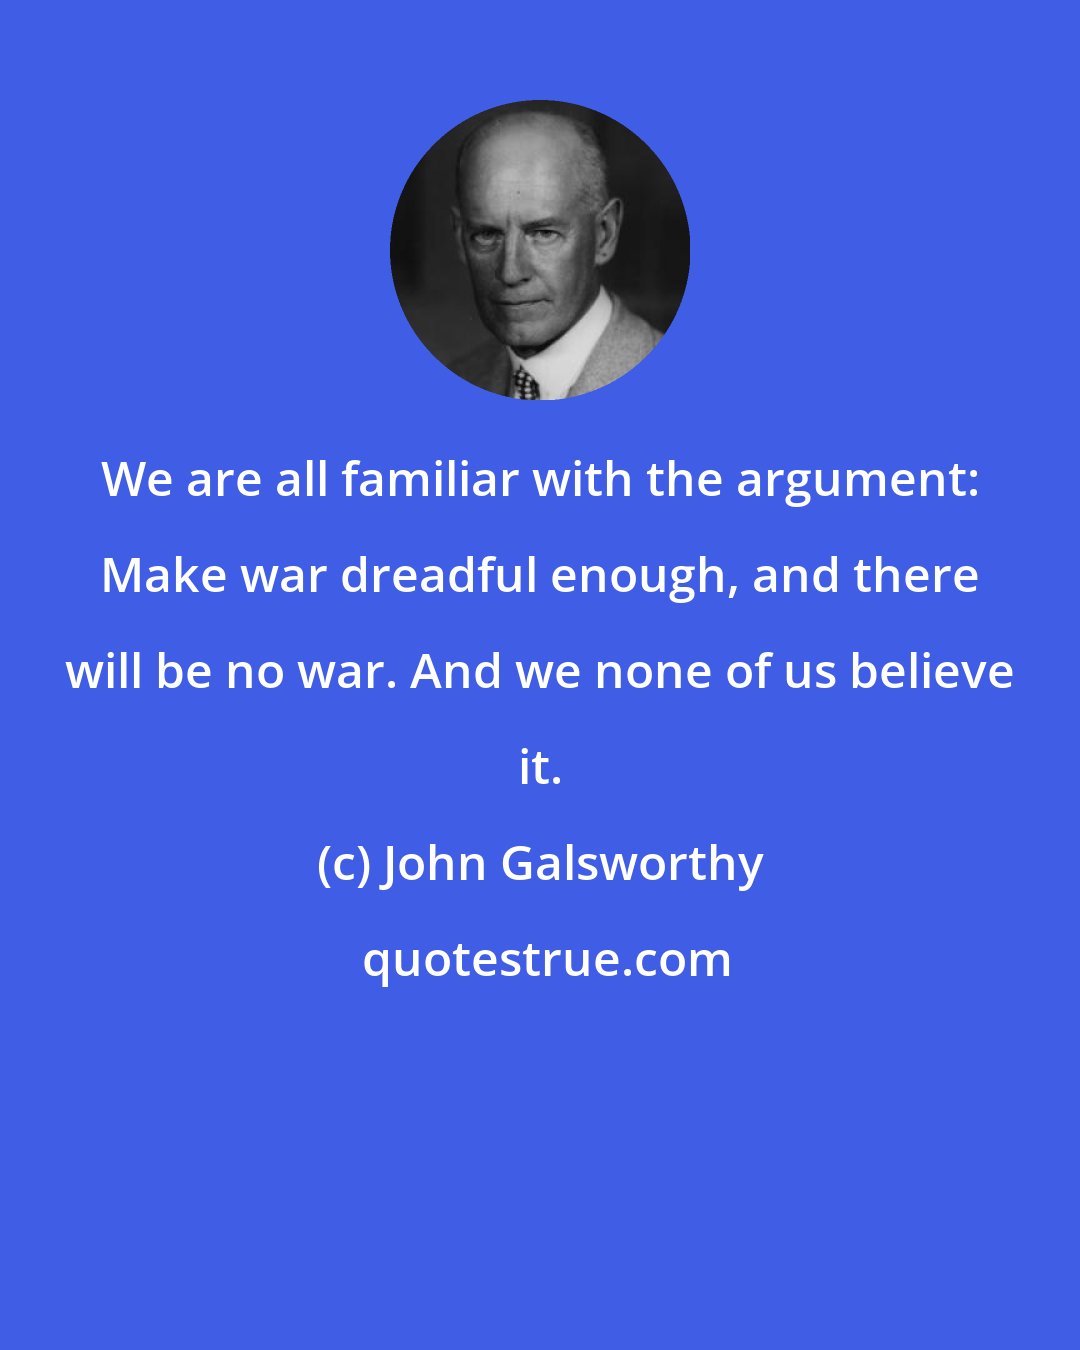 John Galsworthy: We are all familiar with the argument: Make war dreadful enough, and there will be no war. And we none of us believe it.